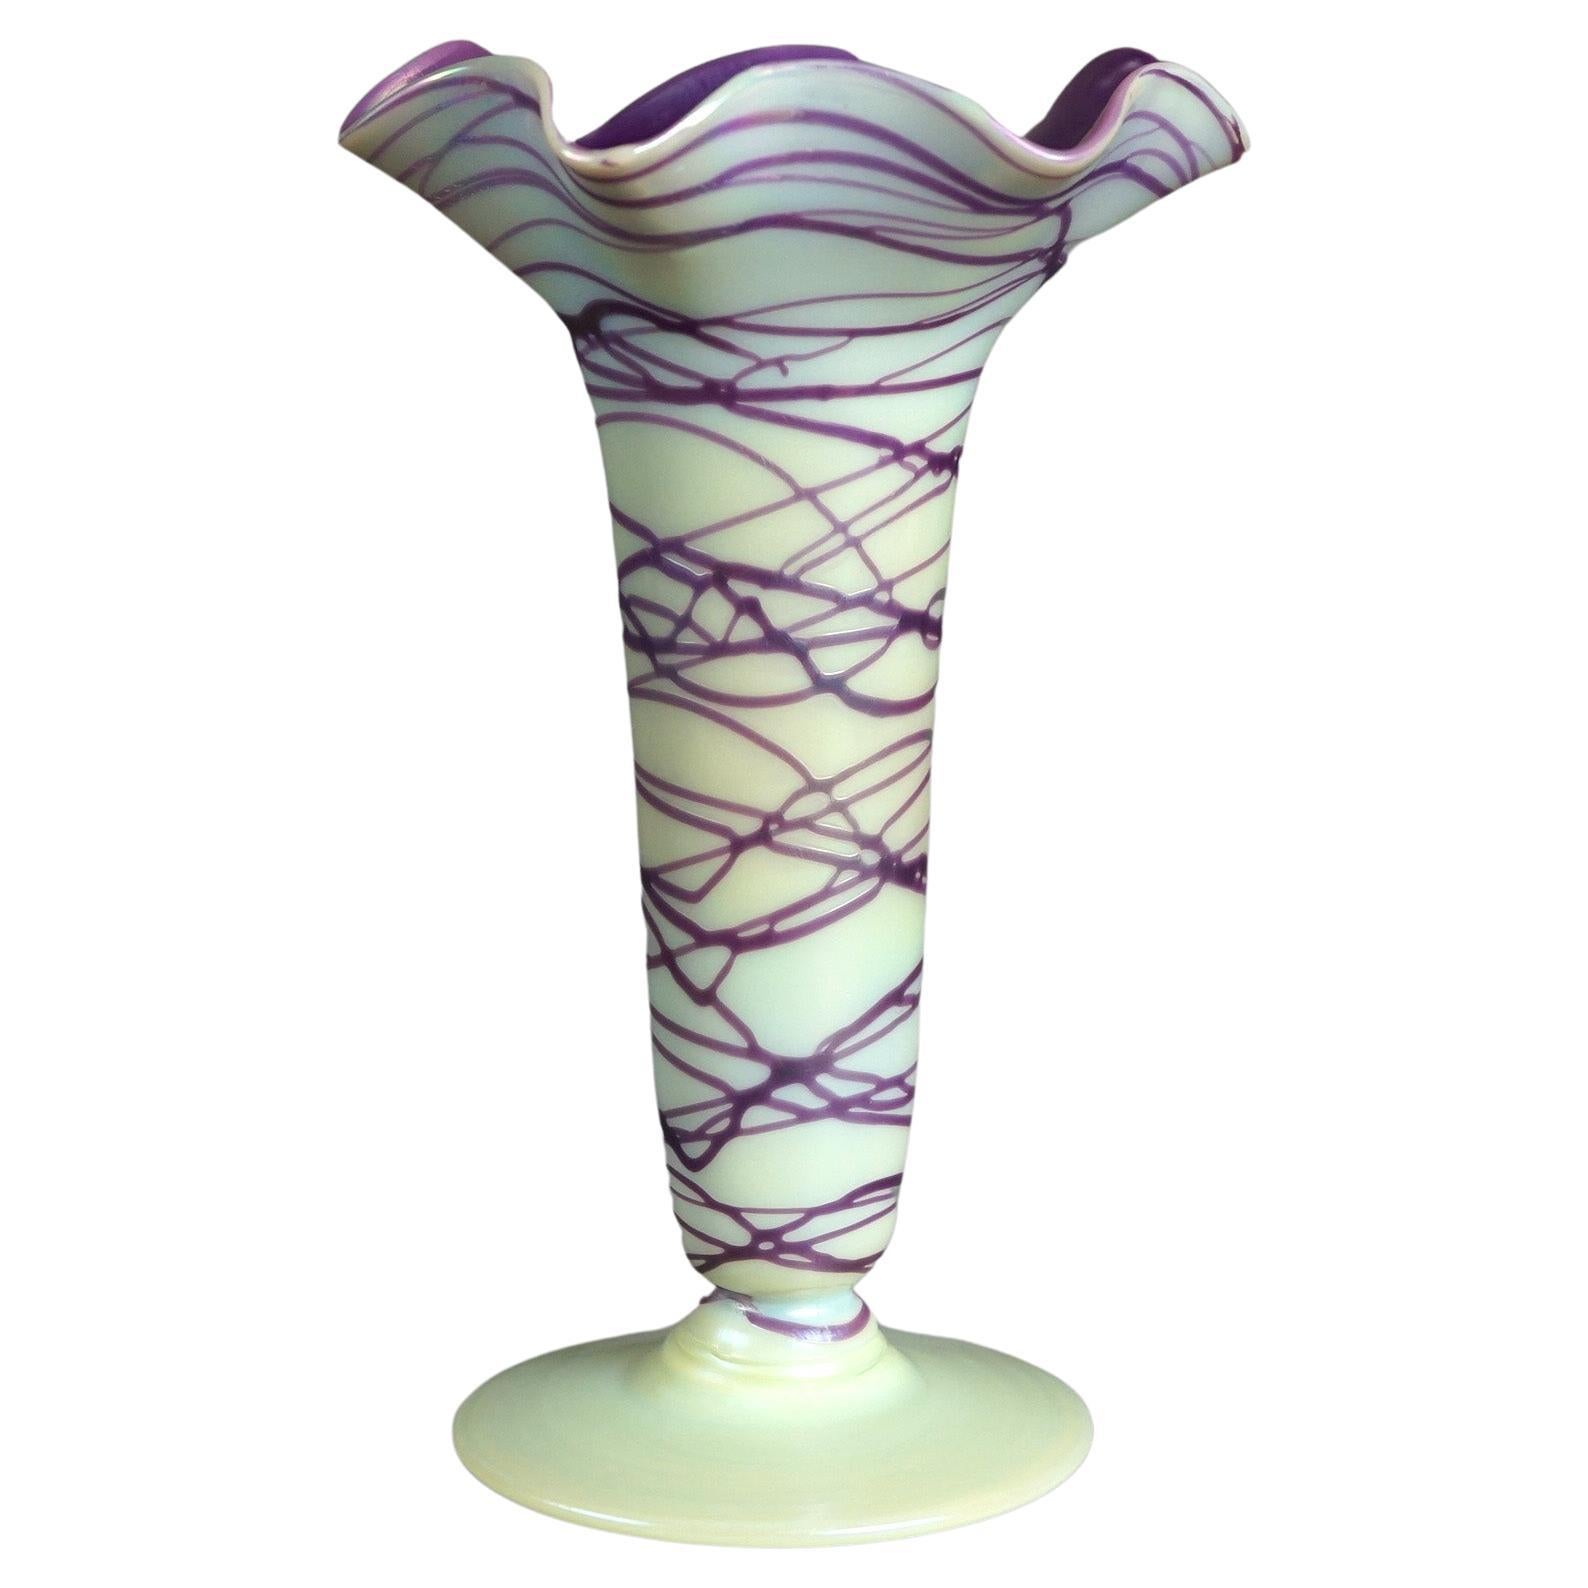 An antique Palmer - Koenig Bohemian vase offers art glass construction in fluted form with eggplant threading and interior as well as ruffled rim, signed on base as photographed, shape #218, c1920

Measures - 9